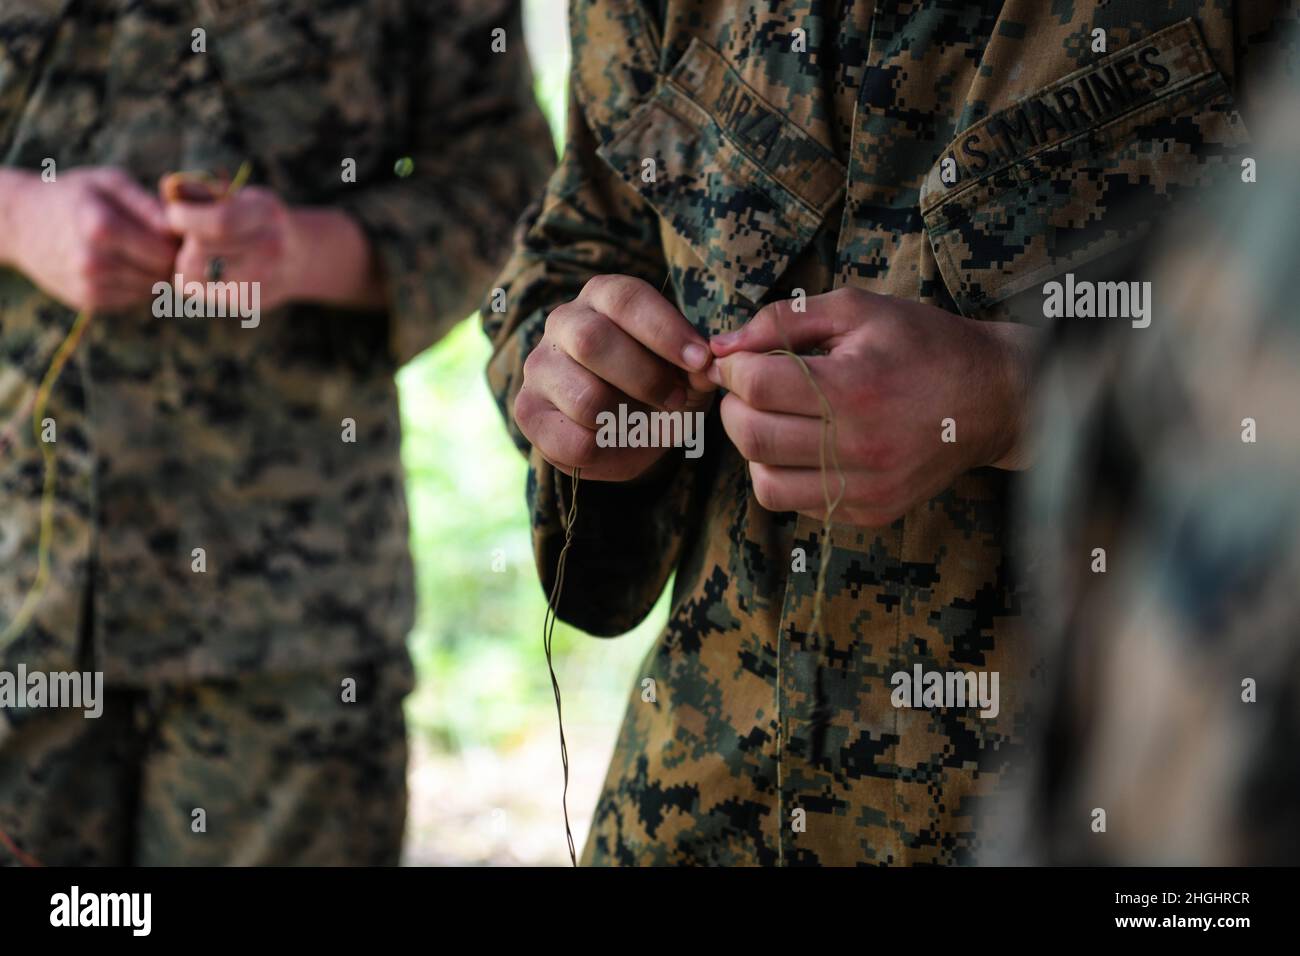 U.S. Marines with Bridge Company, 9th Engineer Support Battalion, 3rd Marine Logistics Group, test wires as part of a Royal Thai Army-led training on how to locate and disarm open-circuit booby-traps during Exercise Cobra Gold 21 at Ta Mor Roi training area in Surin Province, Thailand, Aug. 6, 2021. Royal Thai and American Armed Forces worked together during the exercise to conduct landmine disposal operations, render-safe procedure training, and partnered medical response trauma training. This exercise is aligned with the U.S. Department of Defense’s Humanitarian Mine Action Program, which as Stock Photo